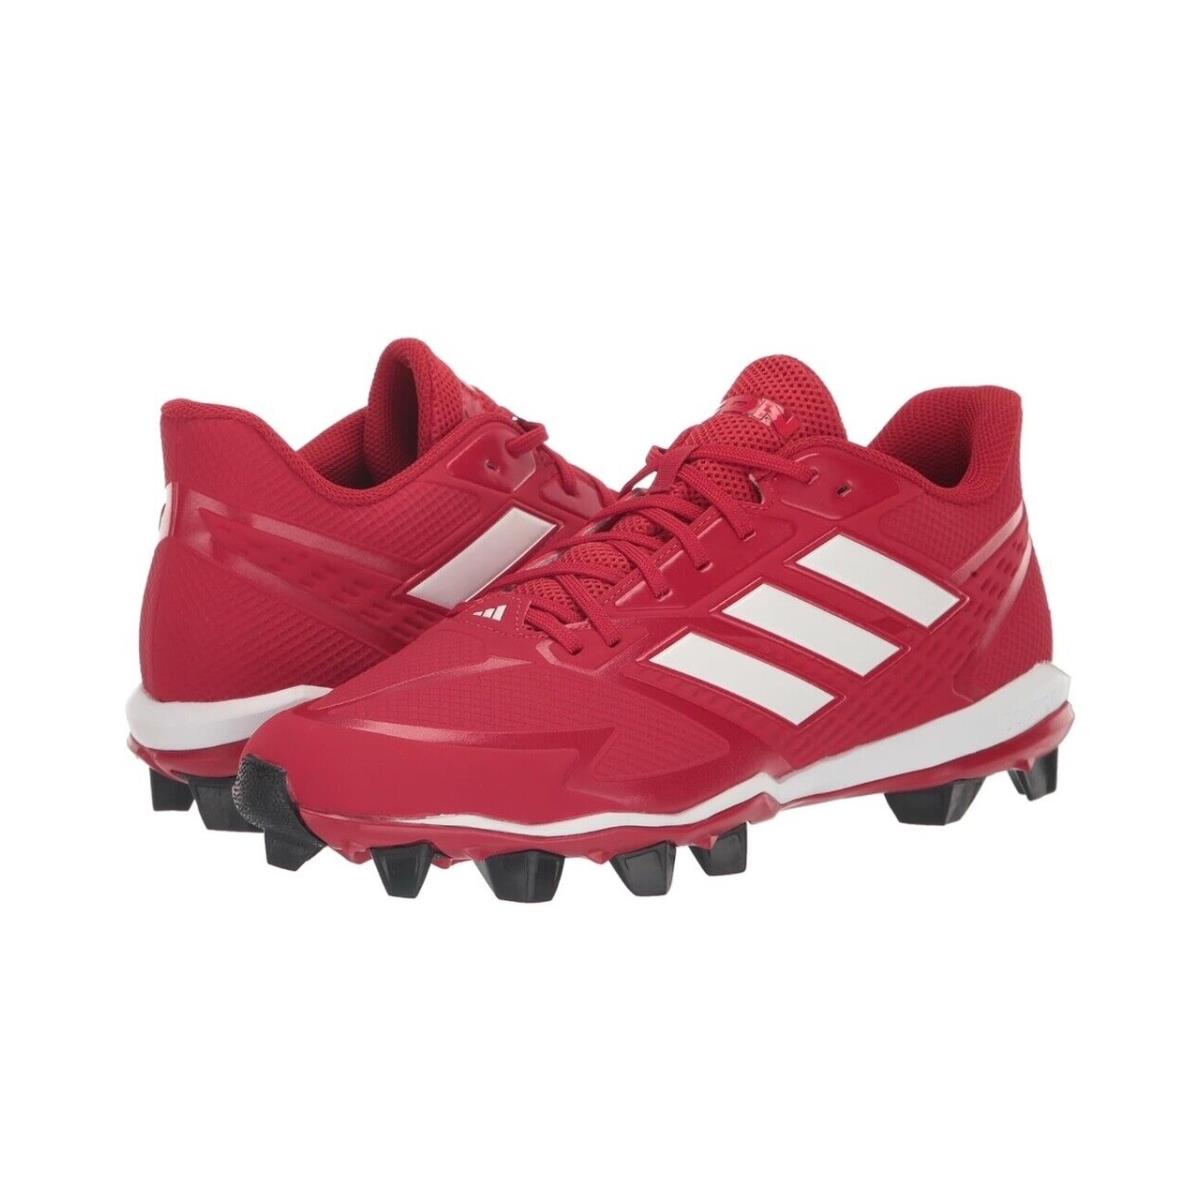 Adidas Men`s Icon 8 Mid Cleats Team Power Red/white/core Black Size: 13 - Team Power Red/White/Core Black